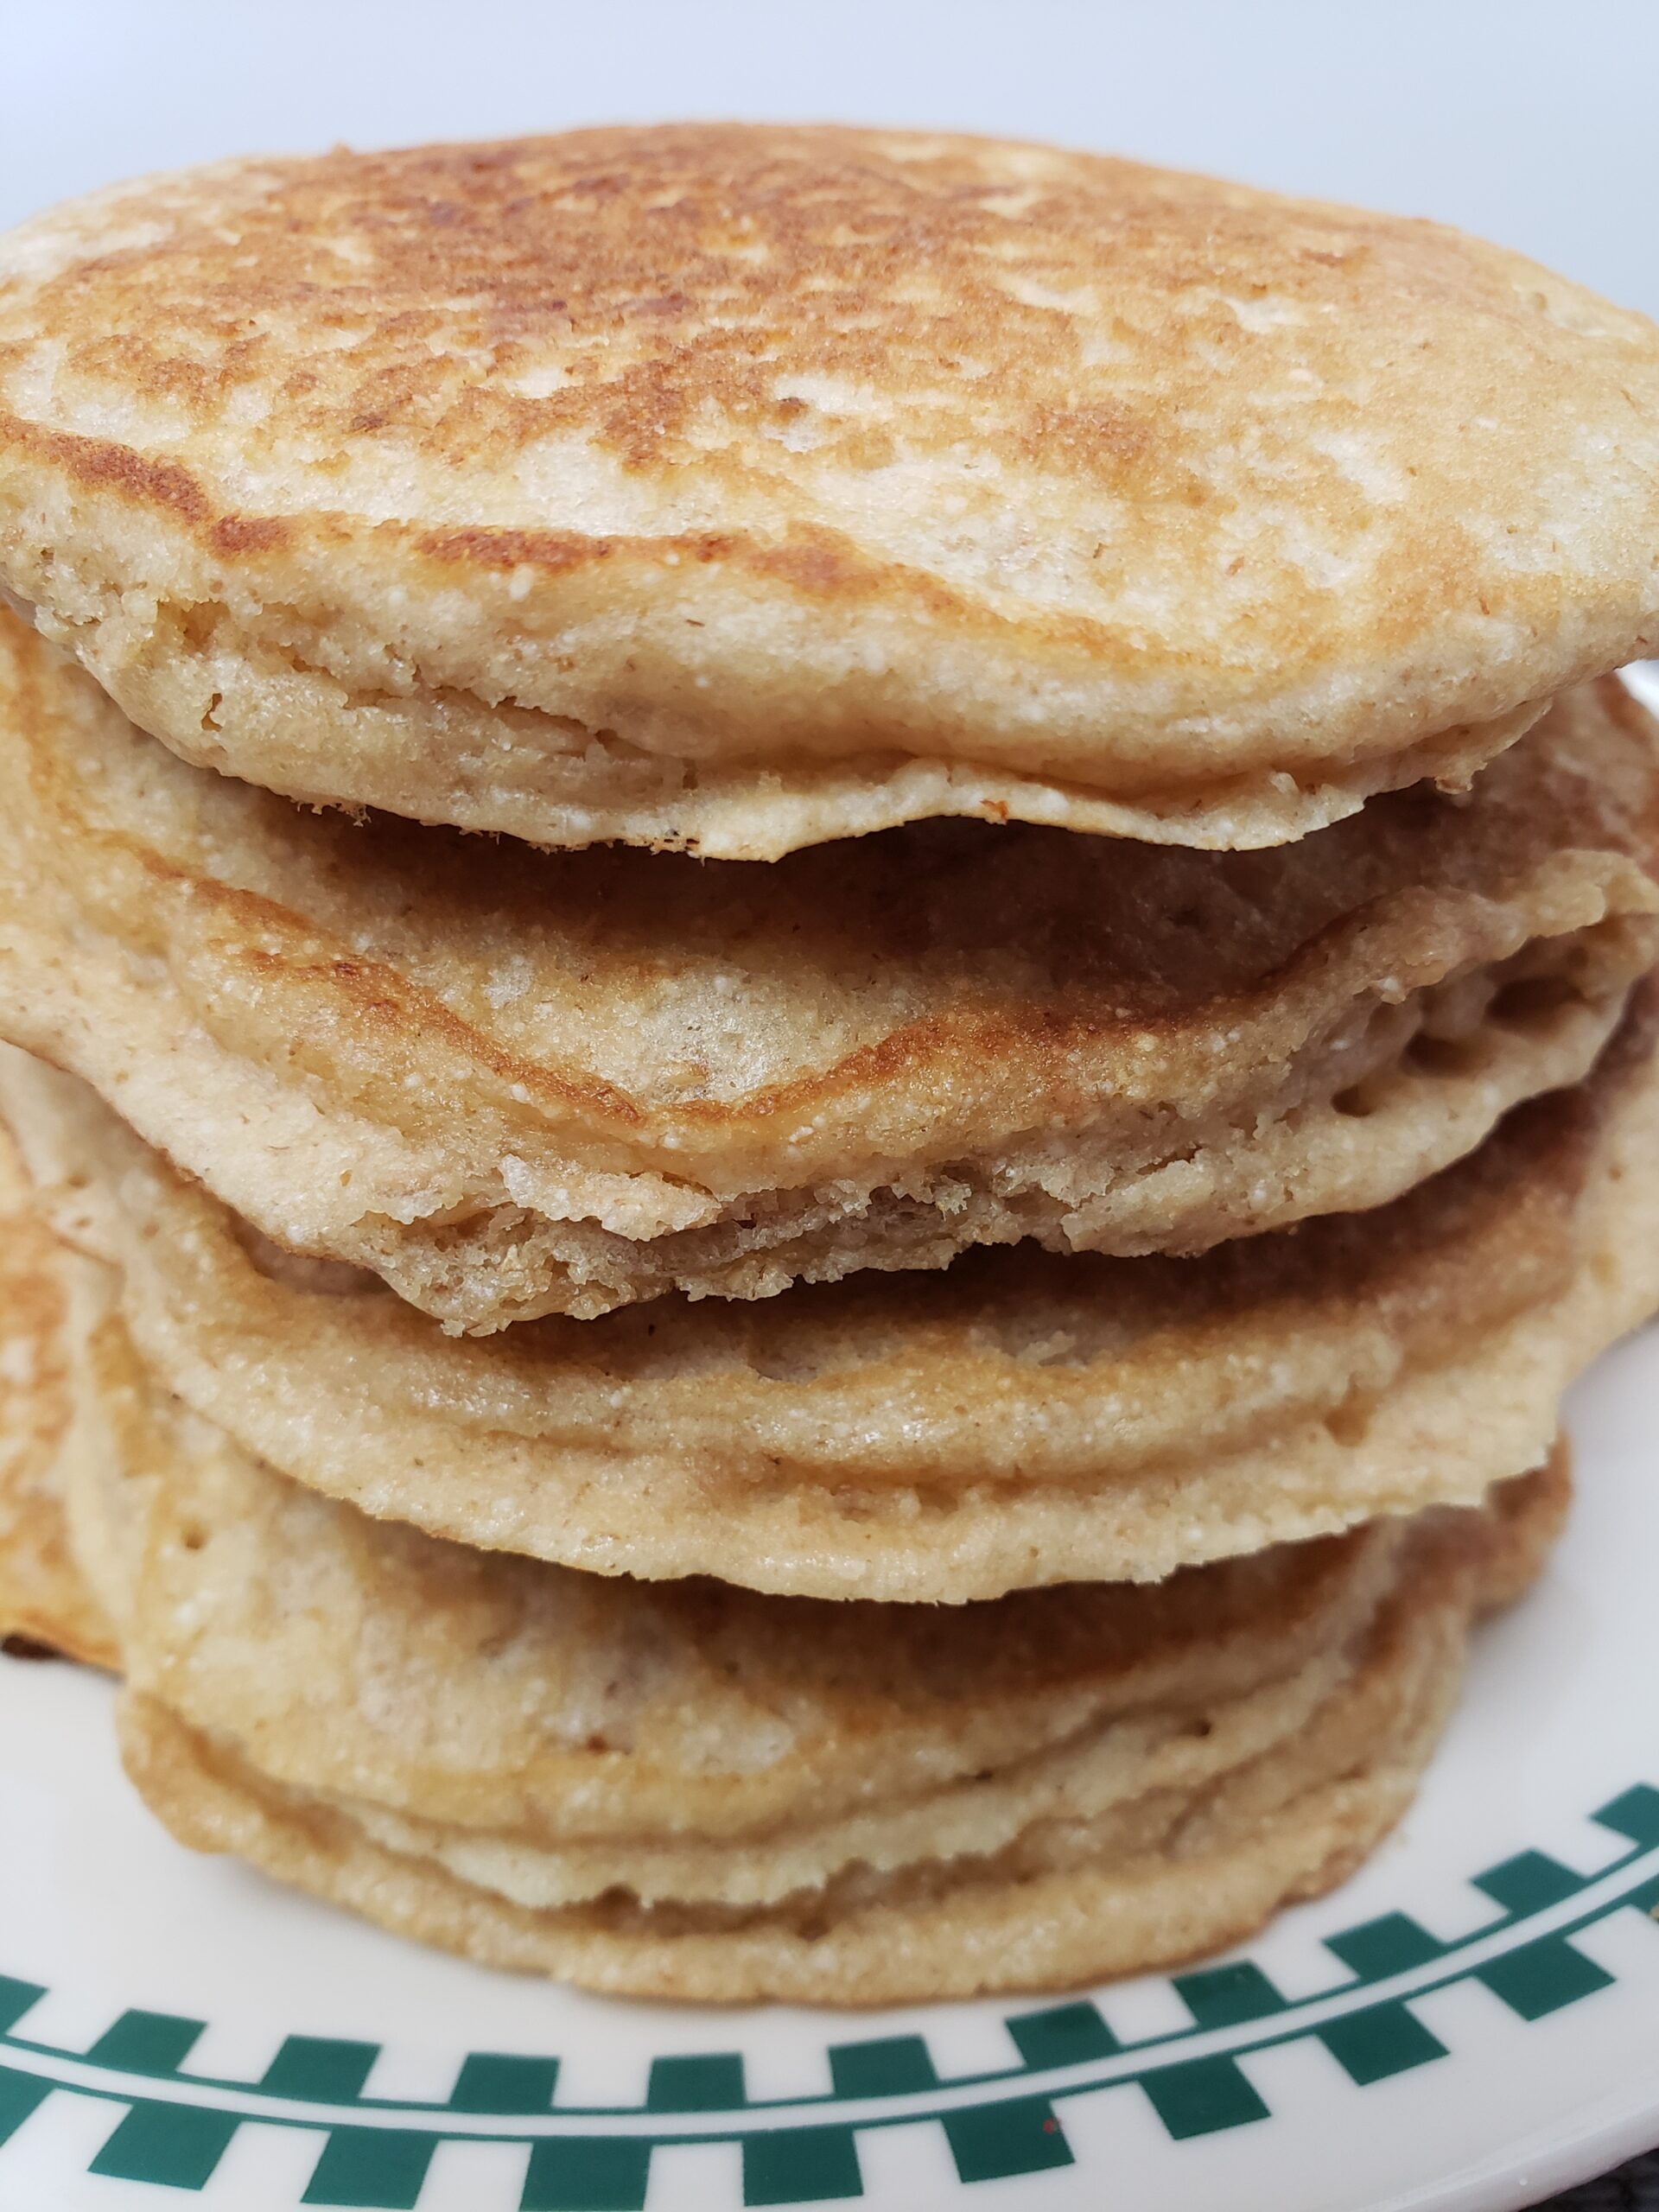 stack of 4 Brown Sugar Oatmeal Pancakes on a plate.